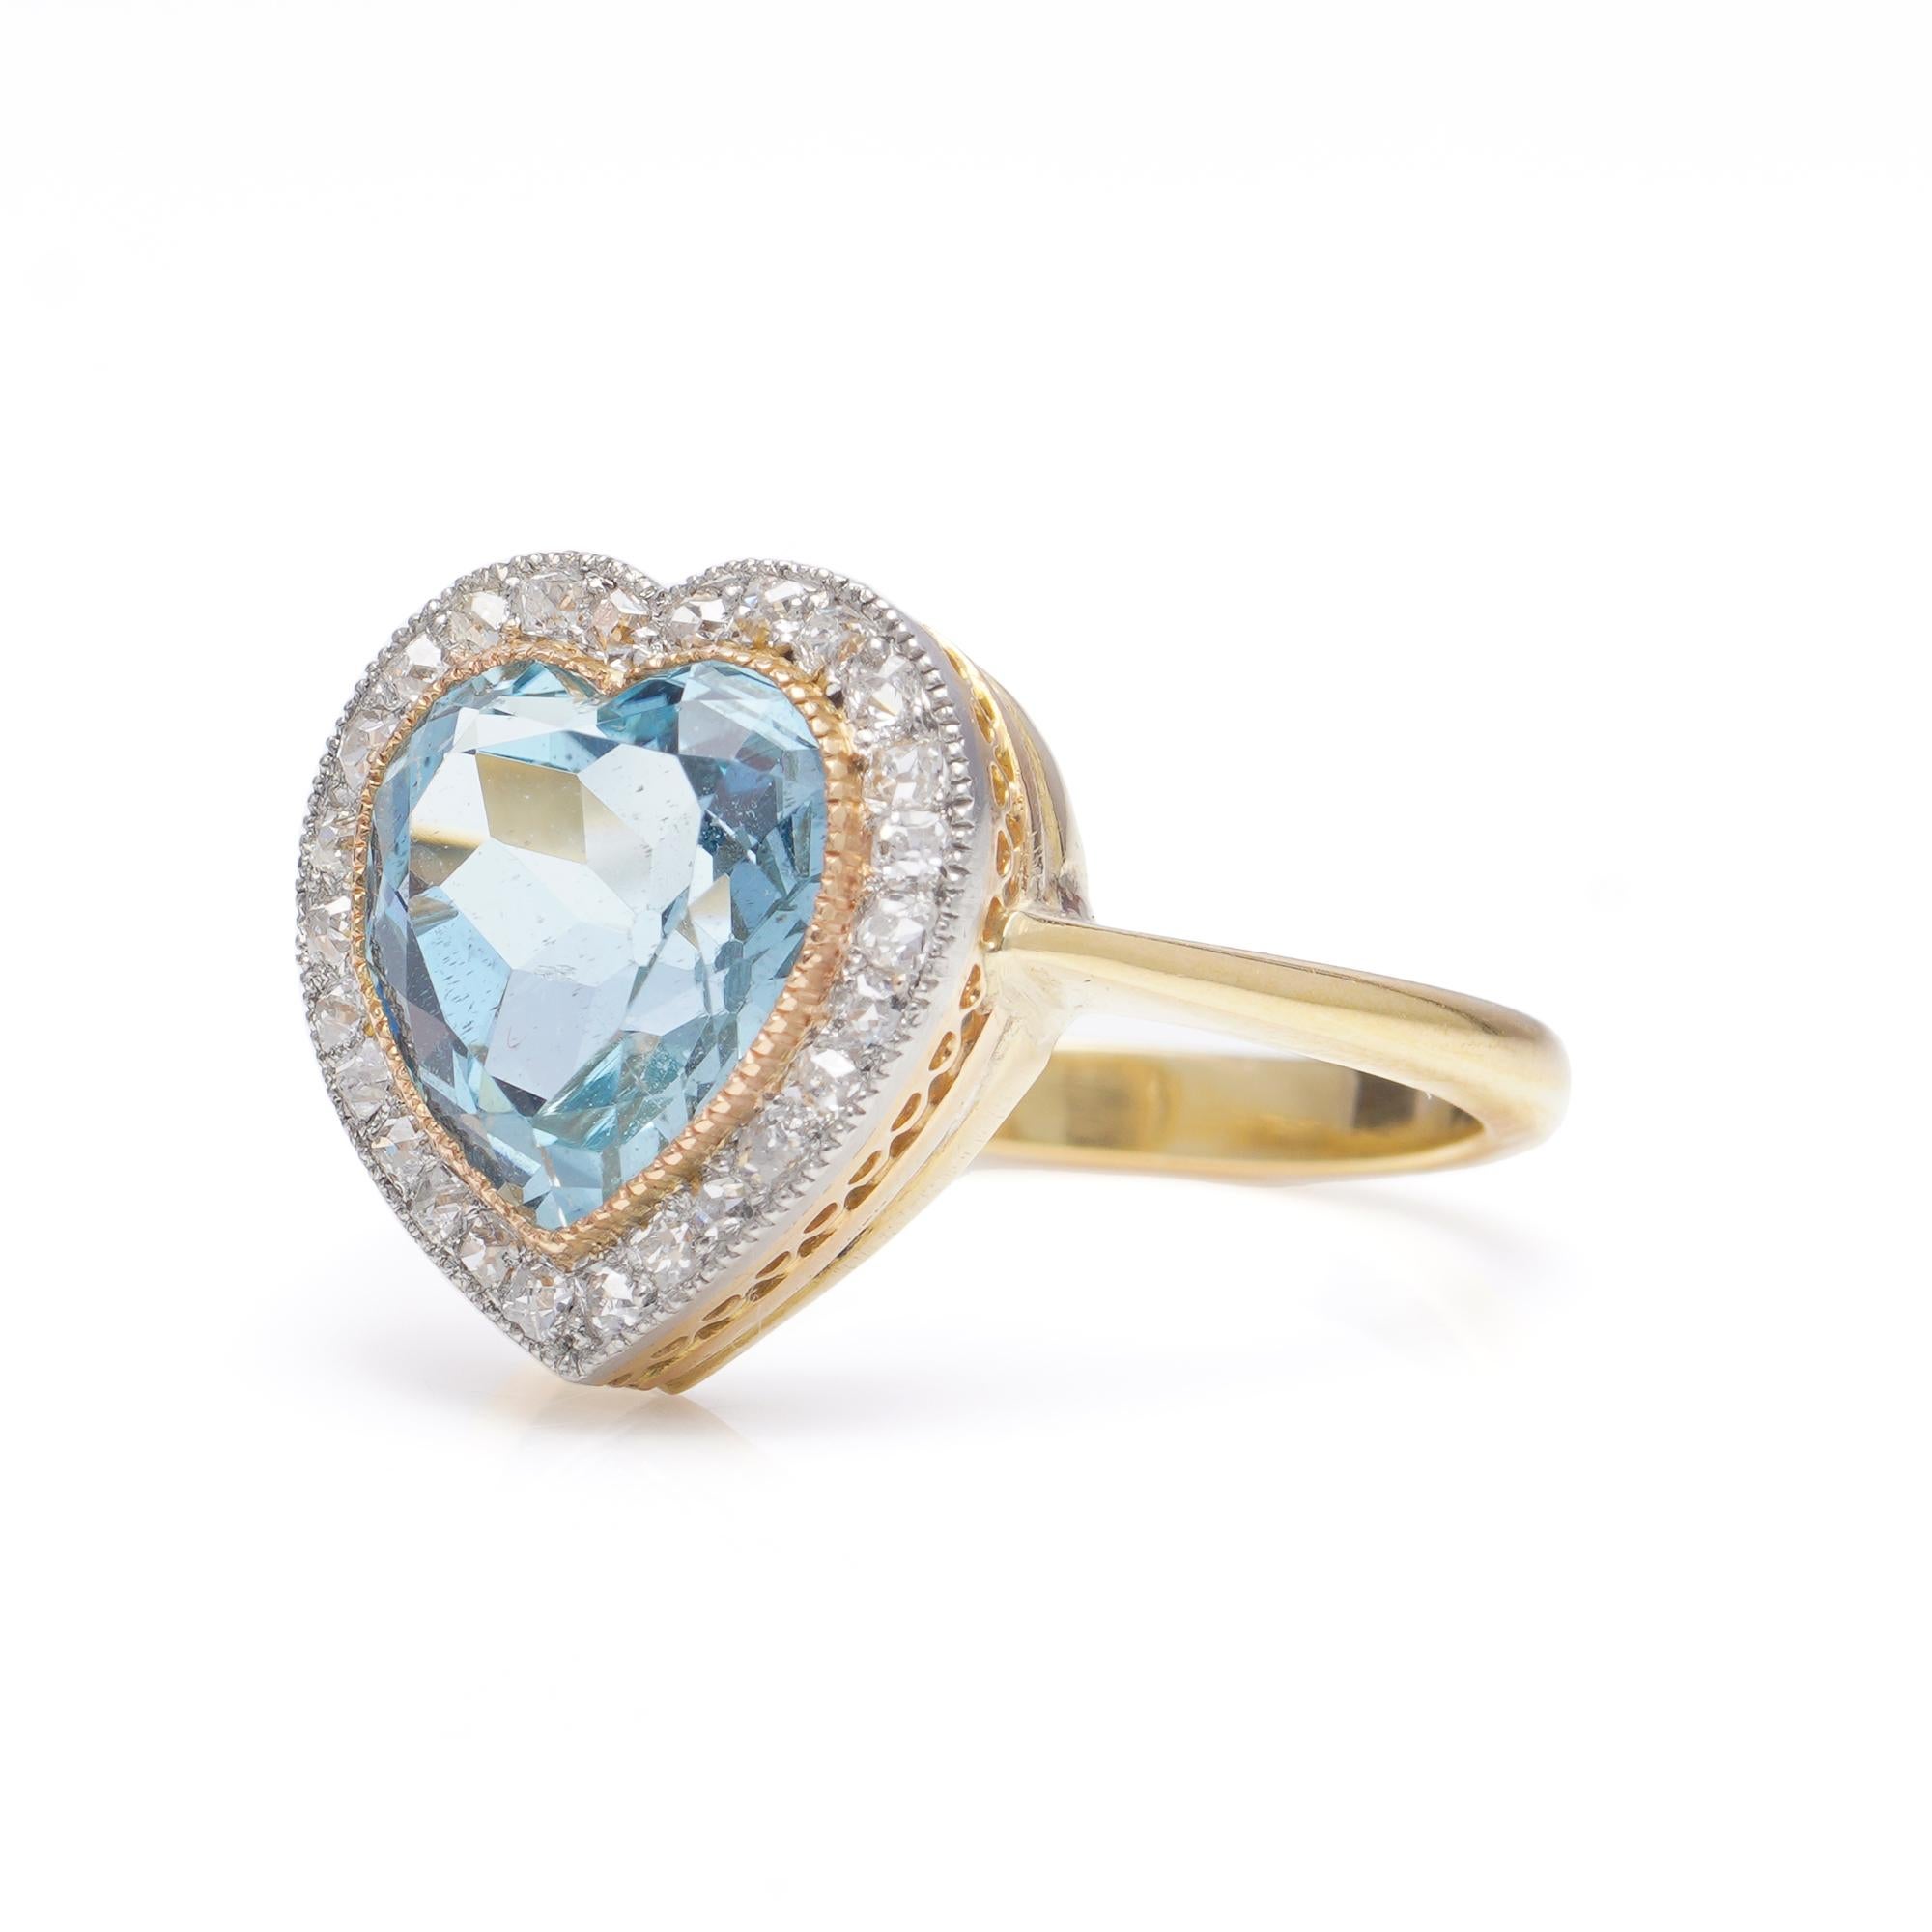 Vintage 18kt Yellow Gold Ladies Ring with Heart Cut 6.00 Ct. Aquamarine For Sale 3